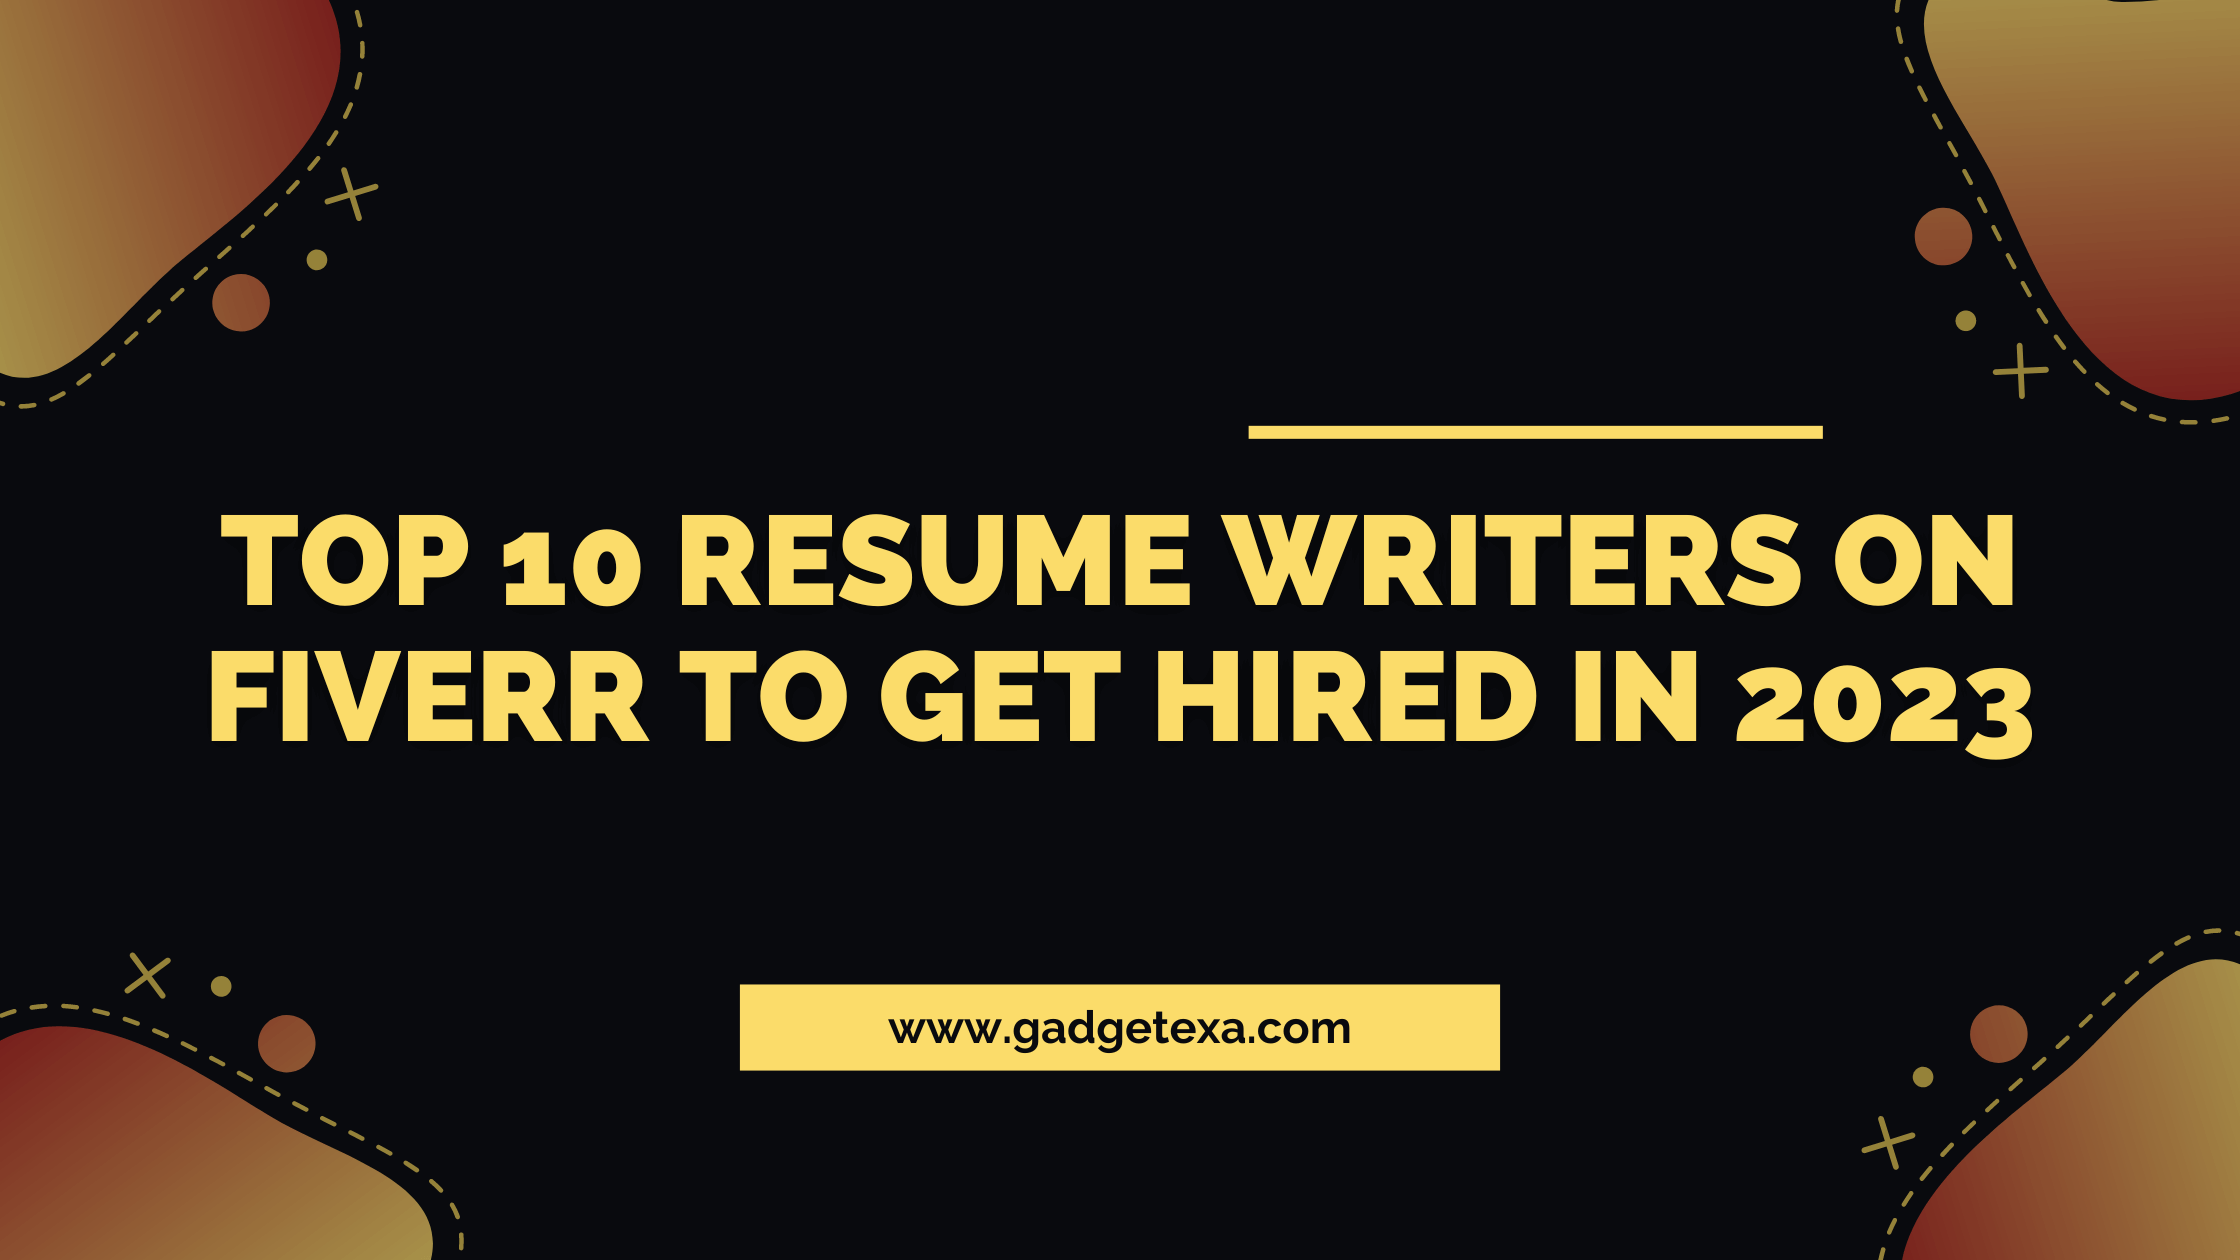 You are currently viewing Top 10 Resume Writers on Fiverr to Get Hired in 2023